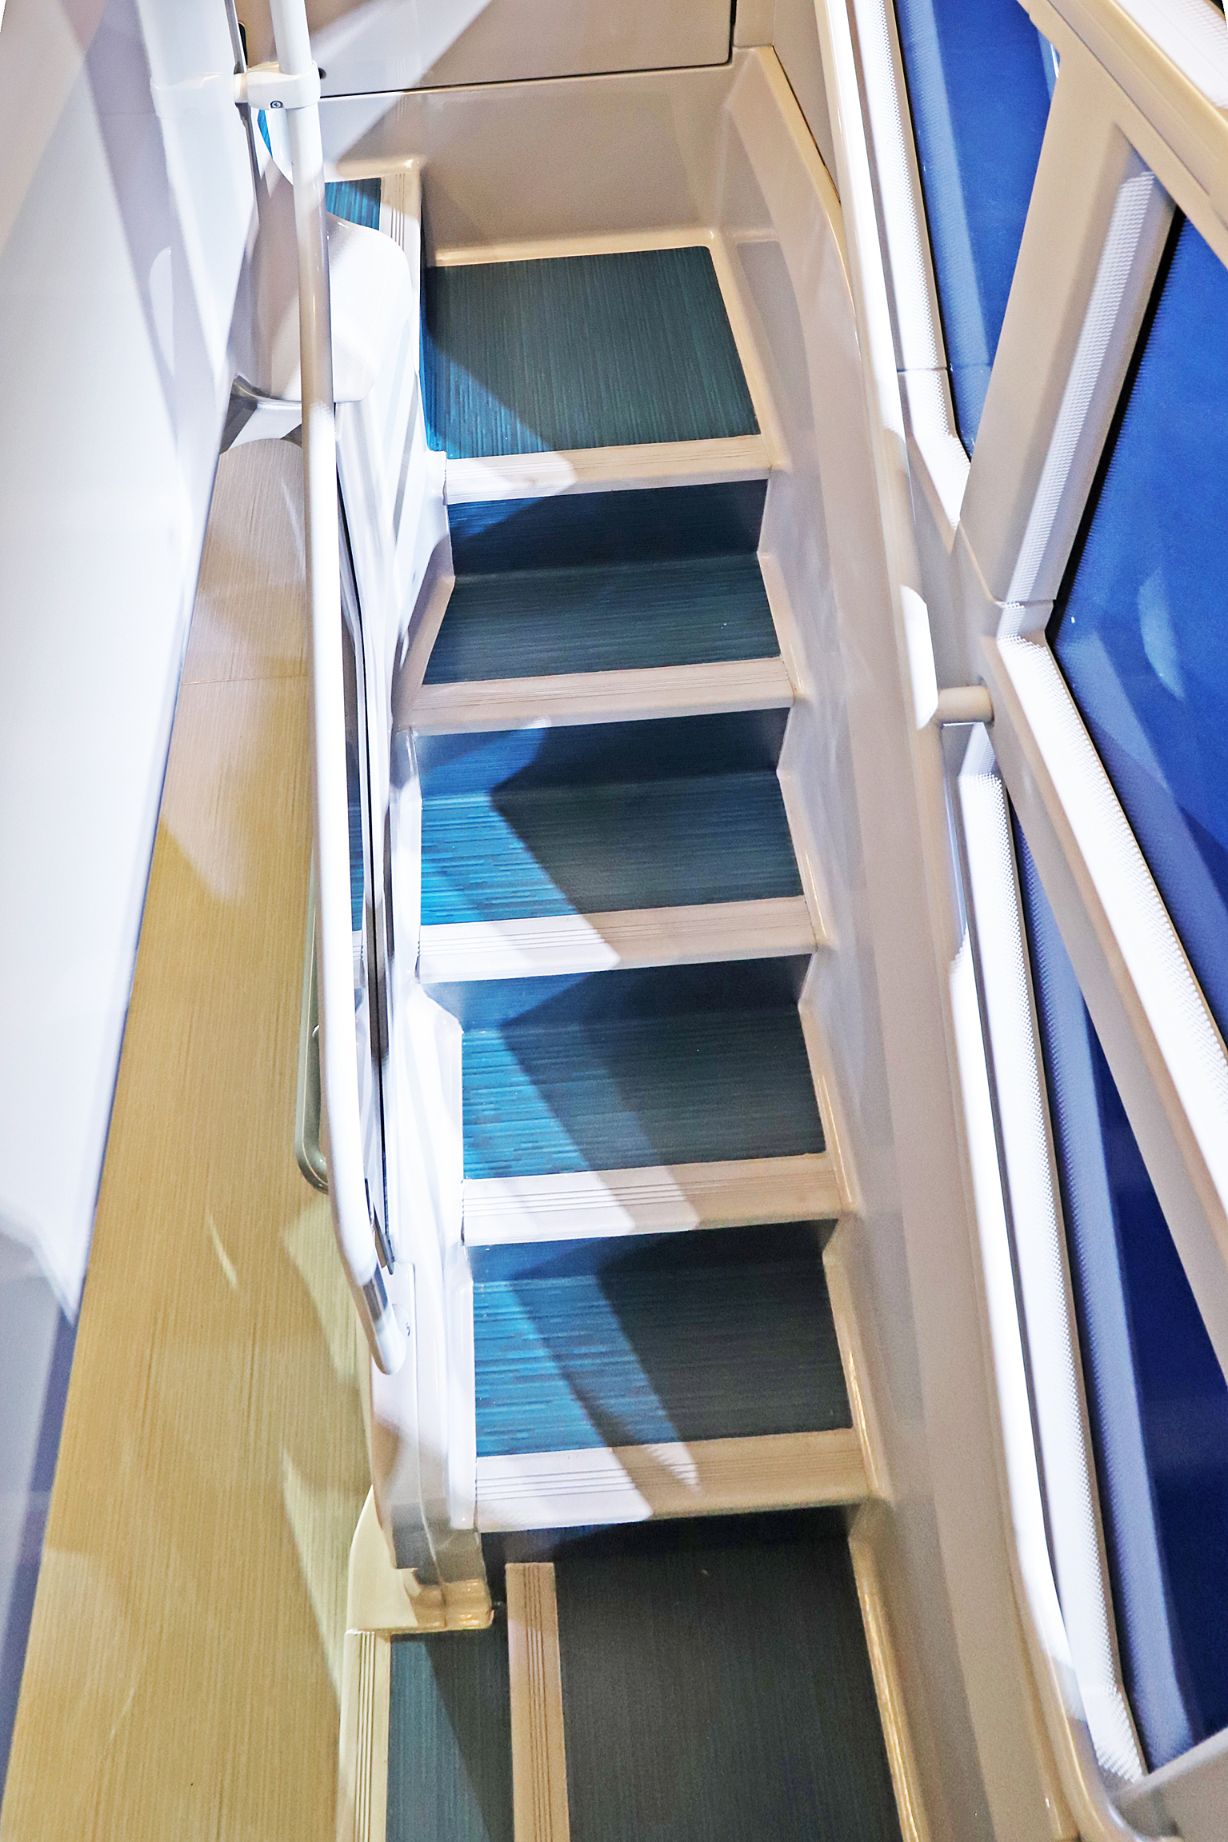 A spacious stairwell in the Enviro400EV